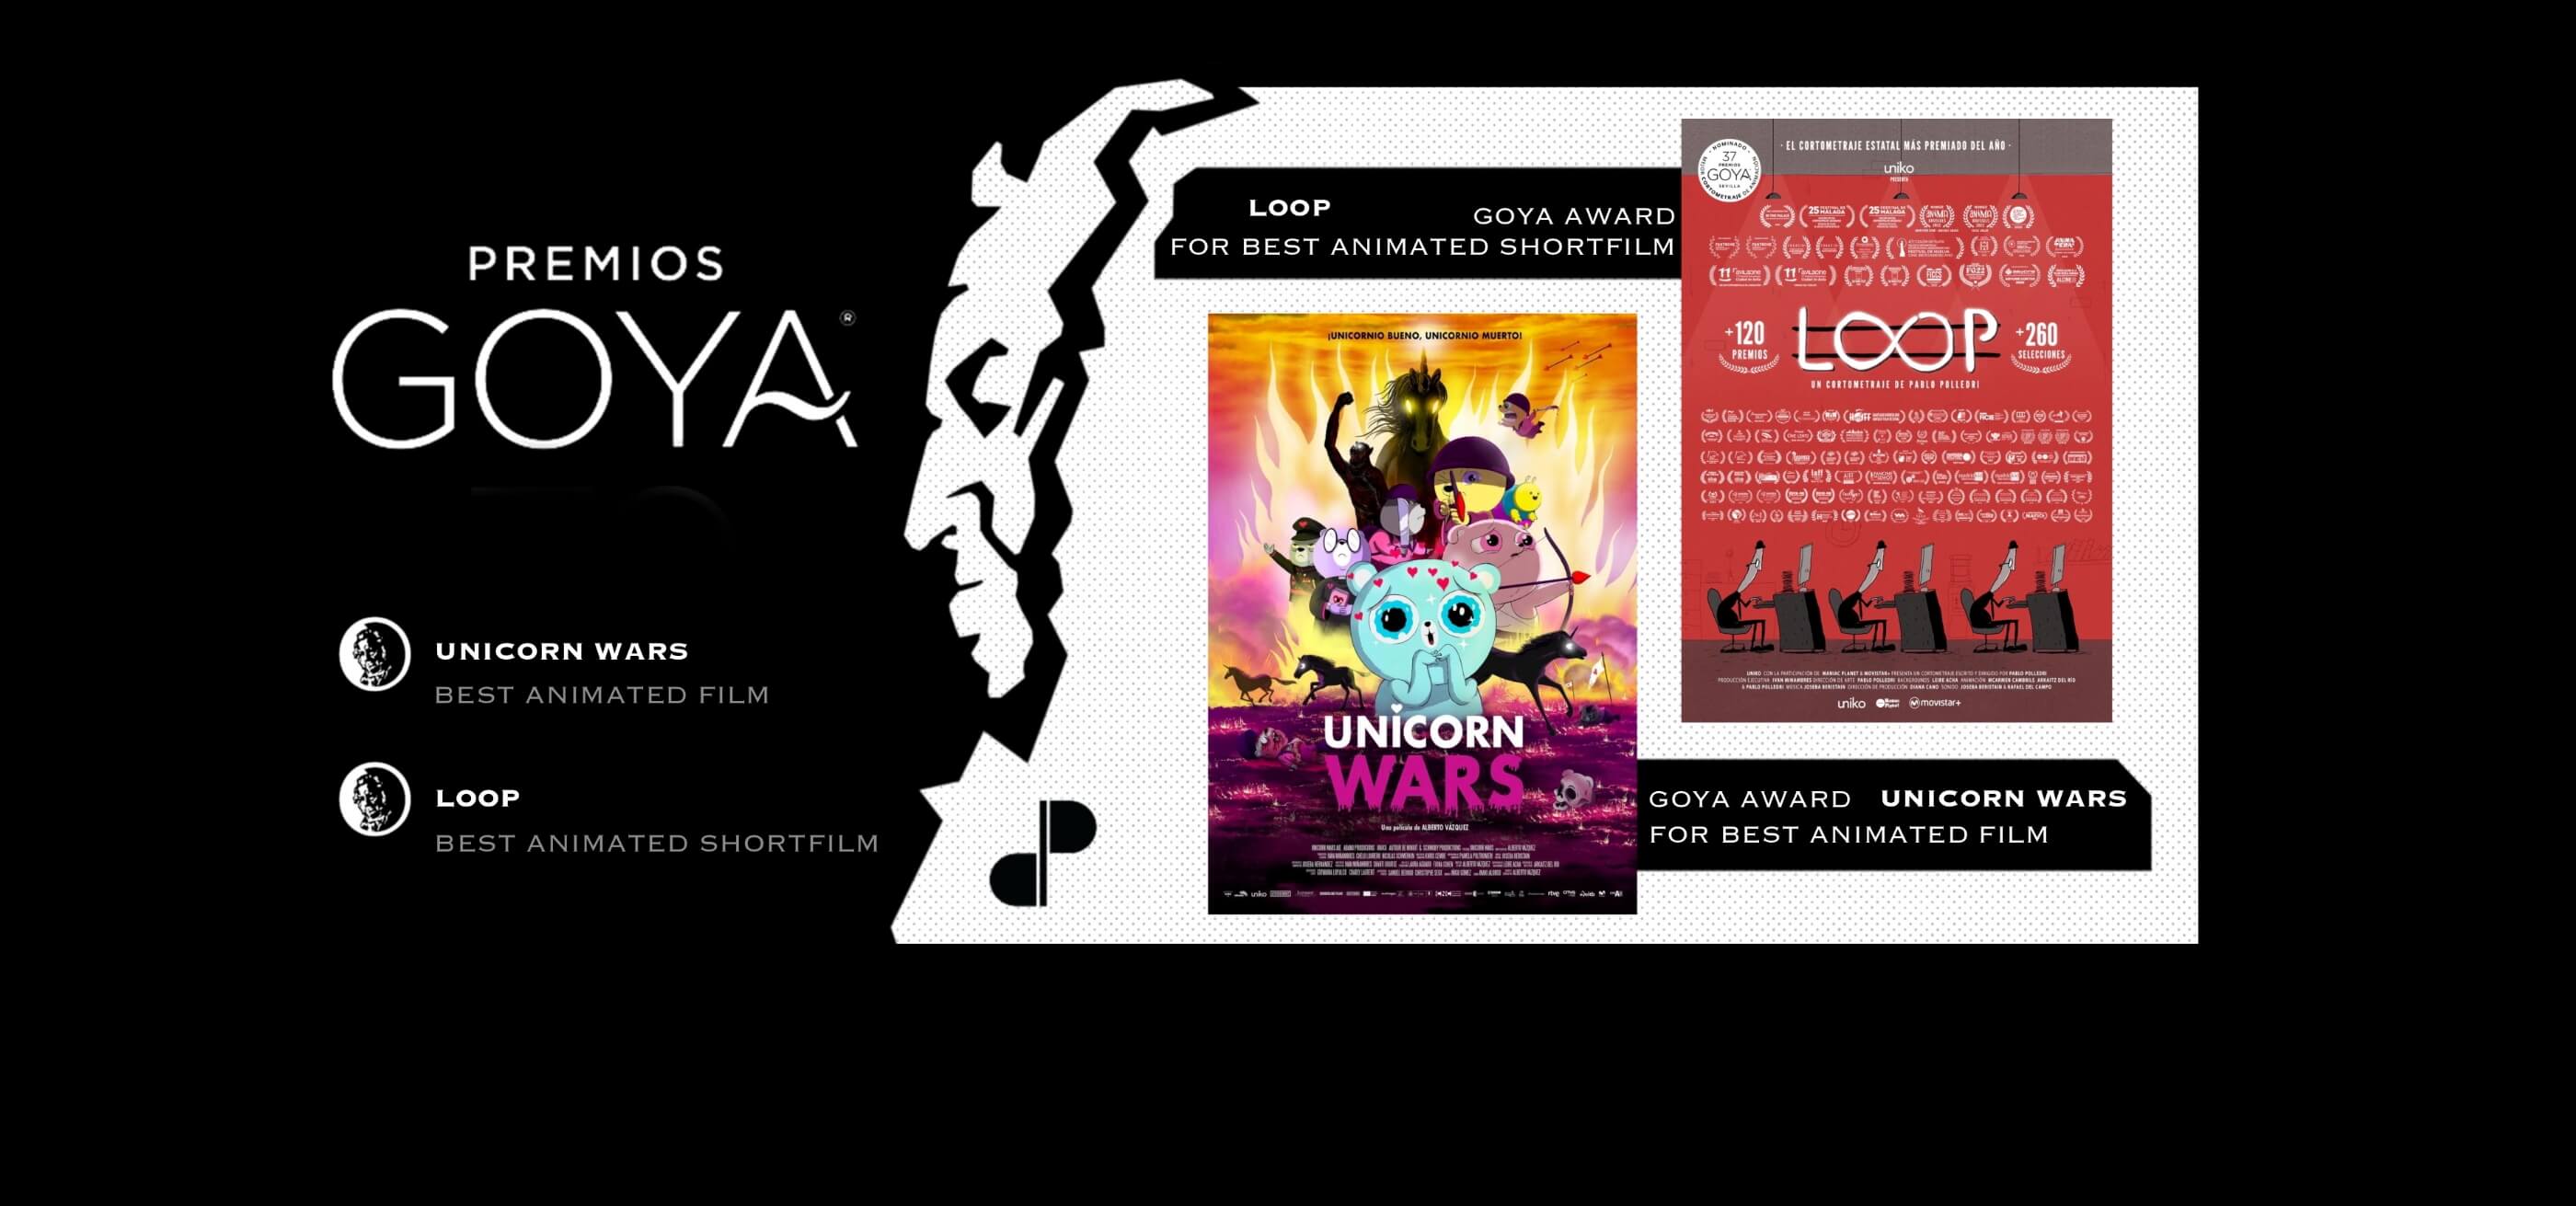 Goya Awards logo with animations Unicorn Wars and Loop posters offset to the side.